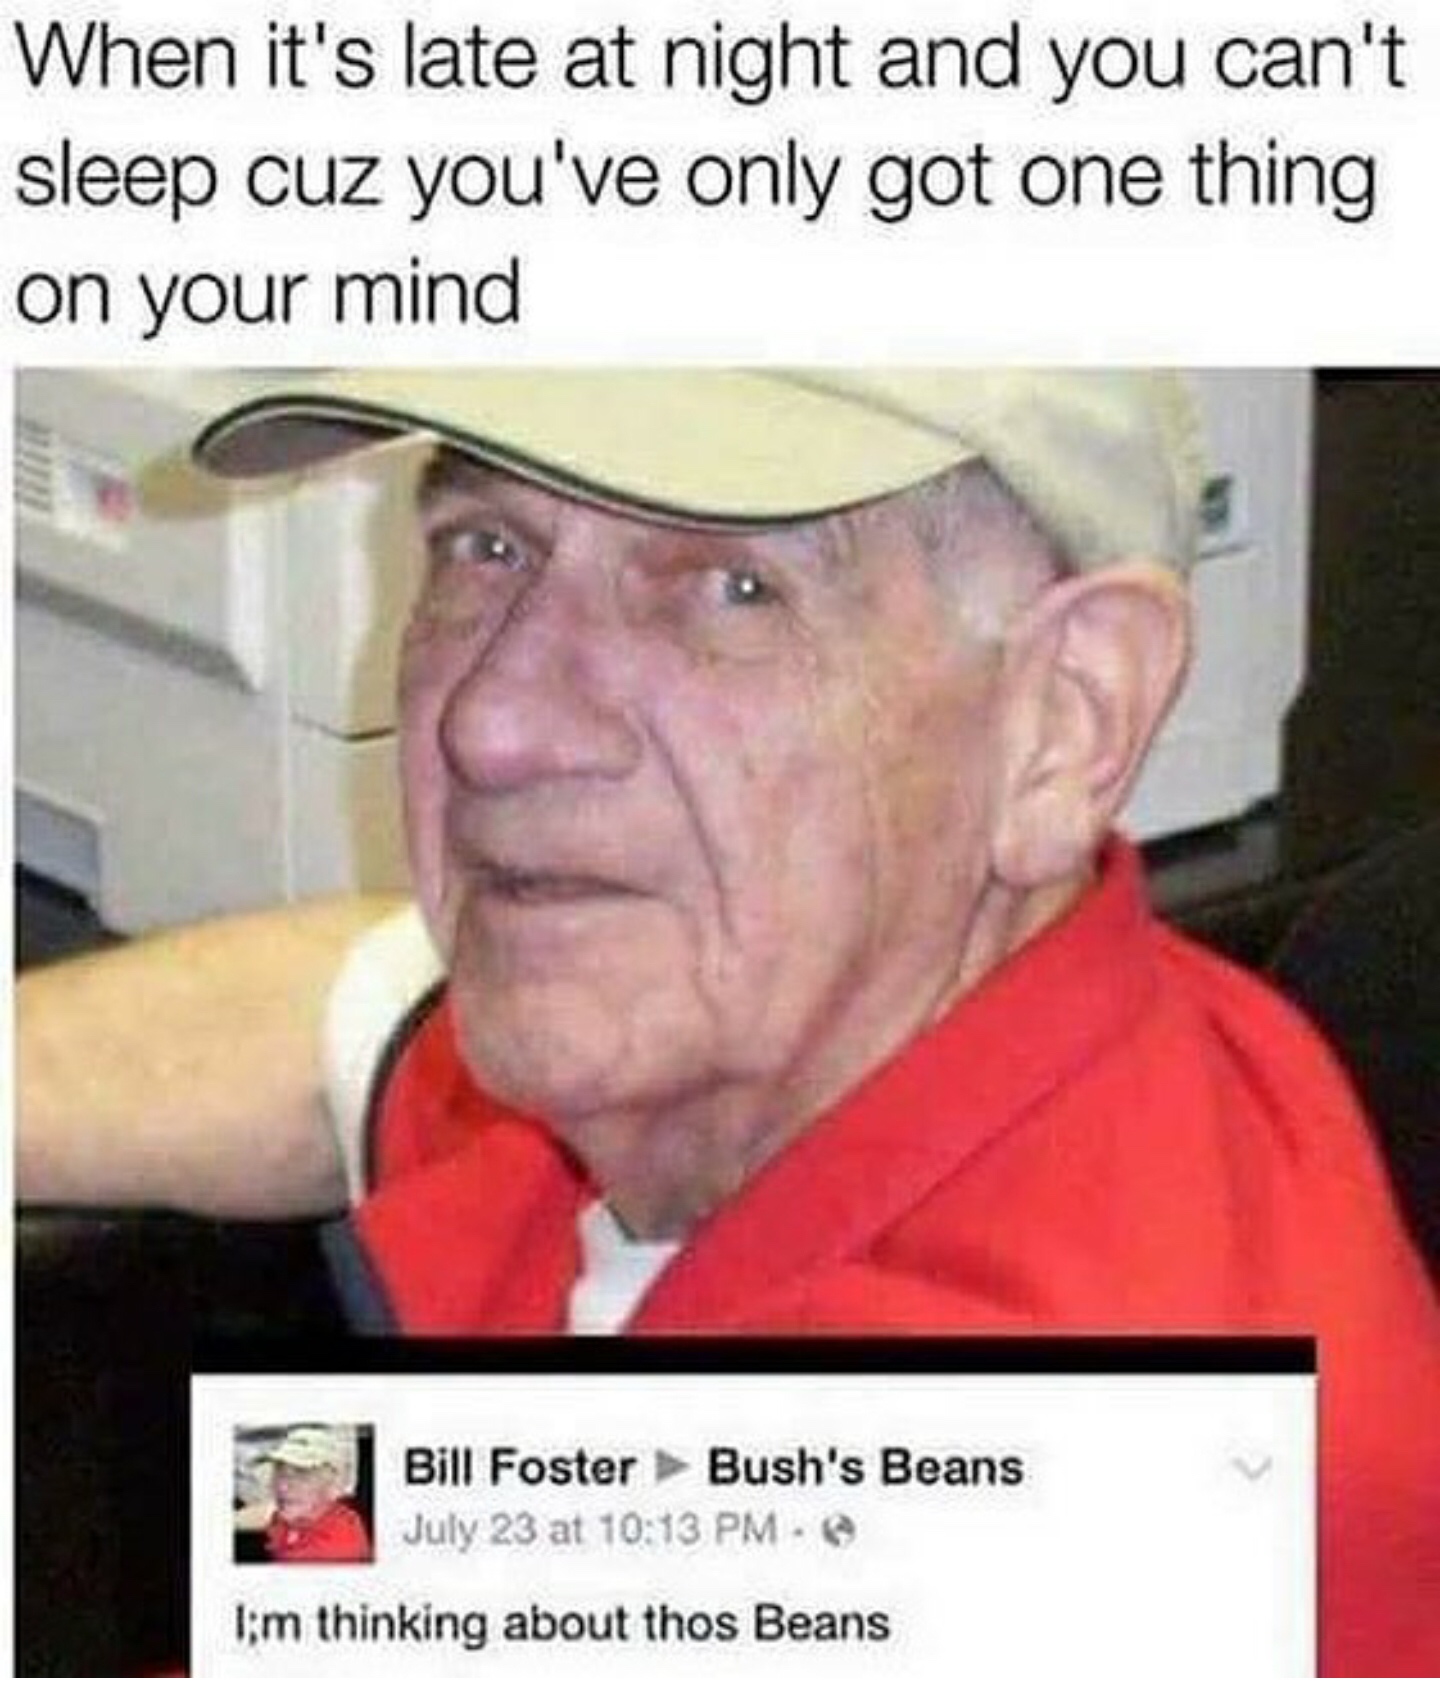 thinking about thos beans - When it's late at night and you can't sleep cuz you've only got one thing on your mind Bill Foster Bush's Beans July 23 at Tim thinking about thos Beans